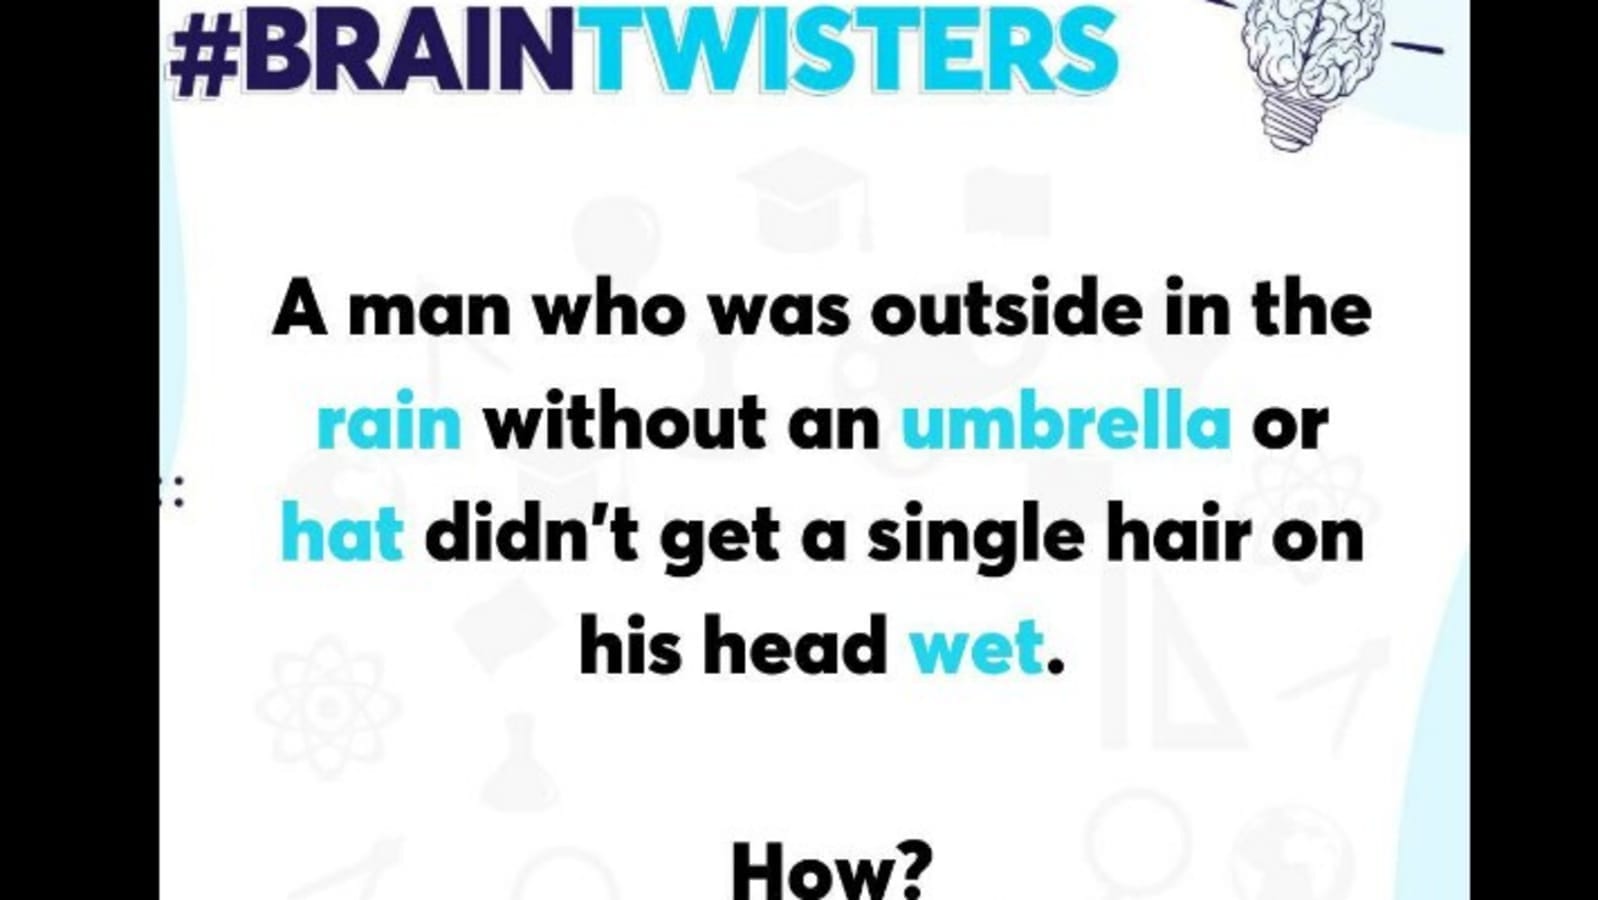 Brain teaser: A man standing in the rain doesn't get his hair wet. Can you tell why?